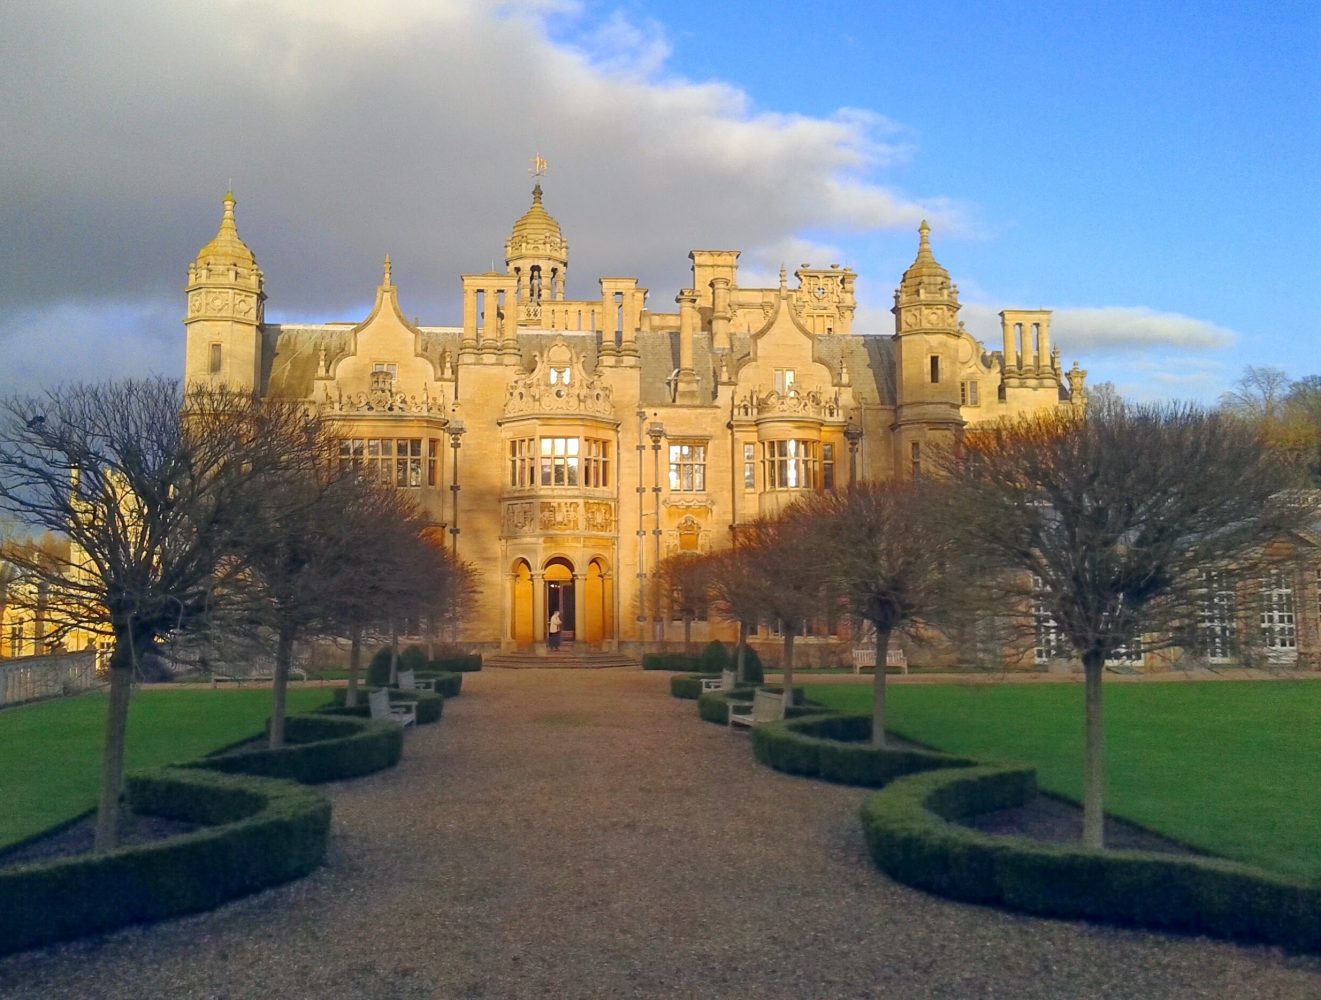 Harlaxton provides lessons in British culture